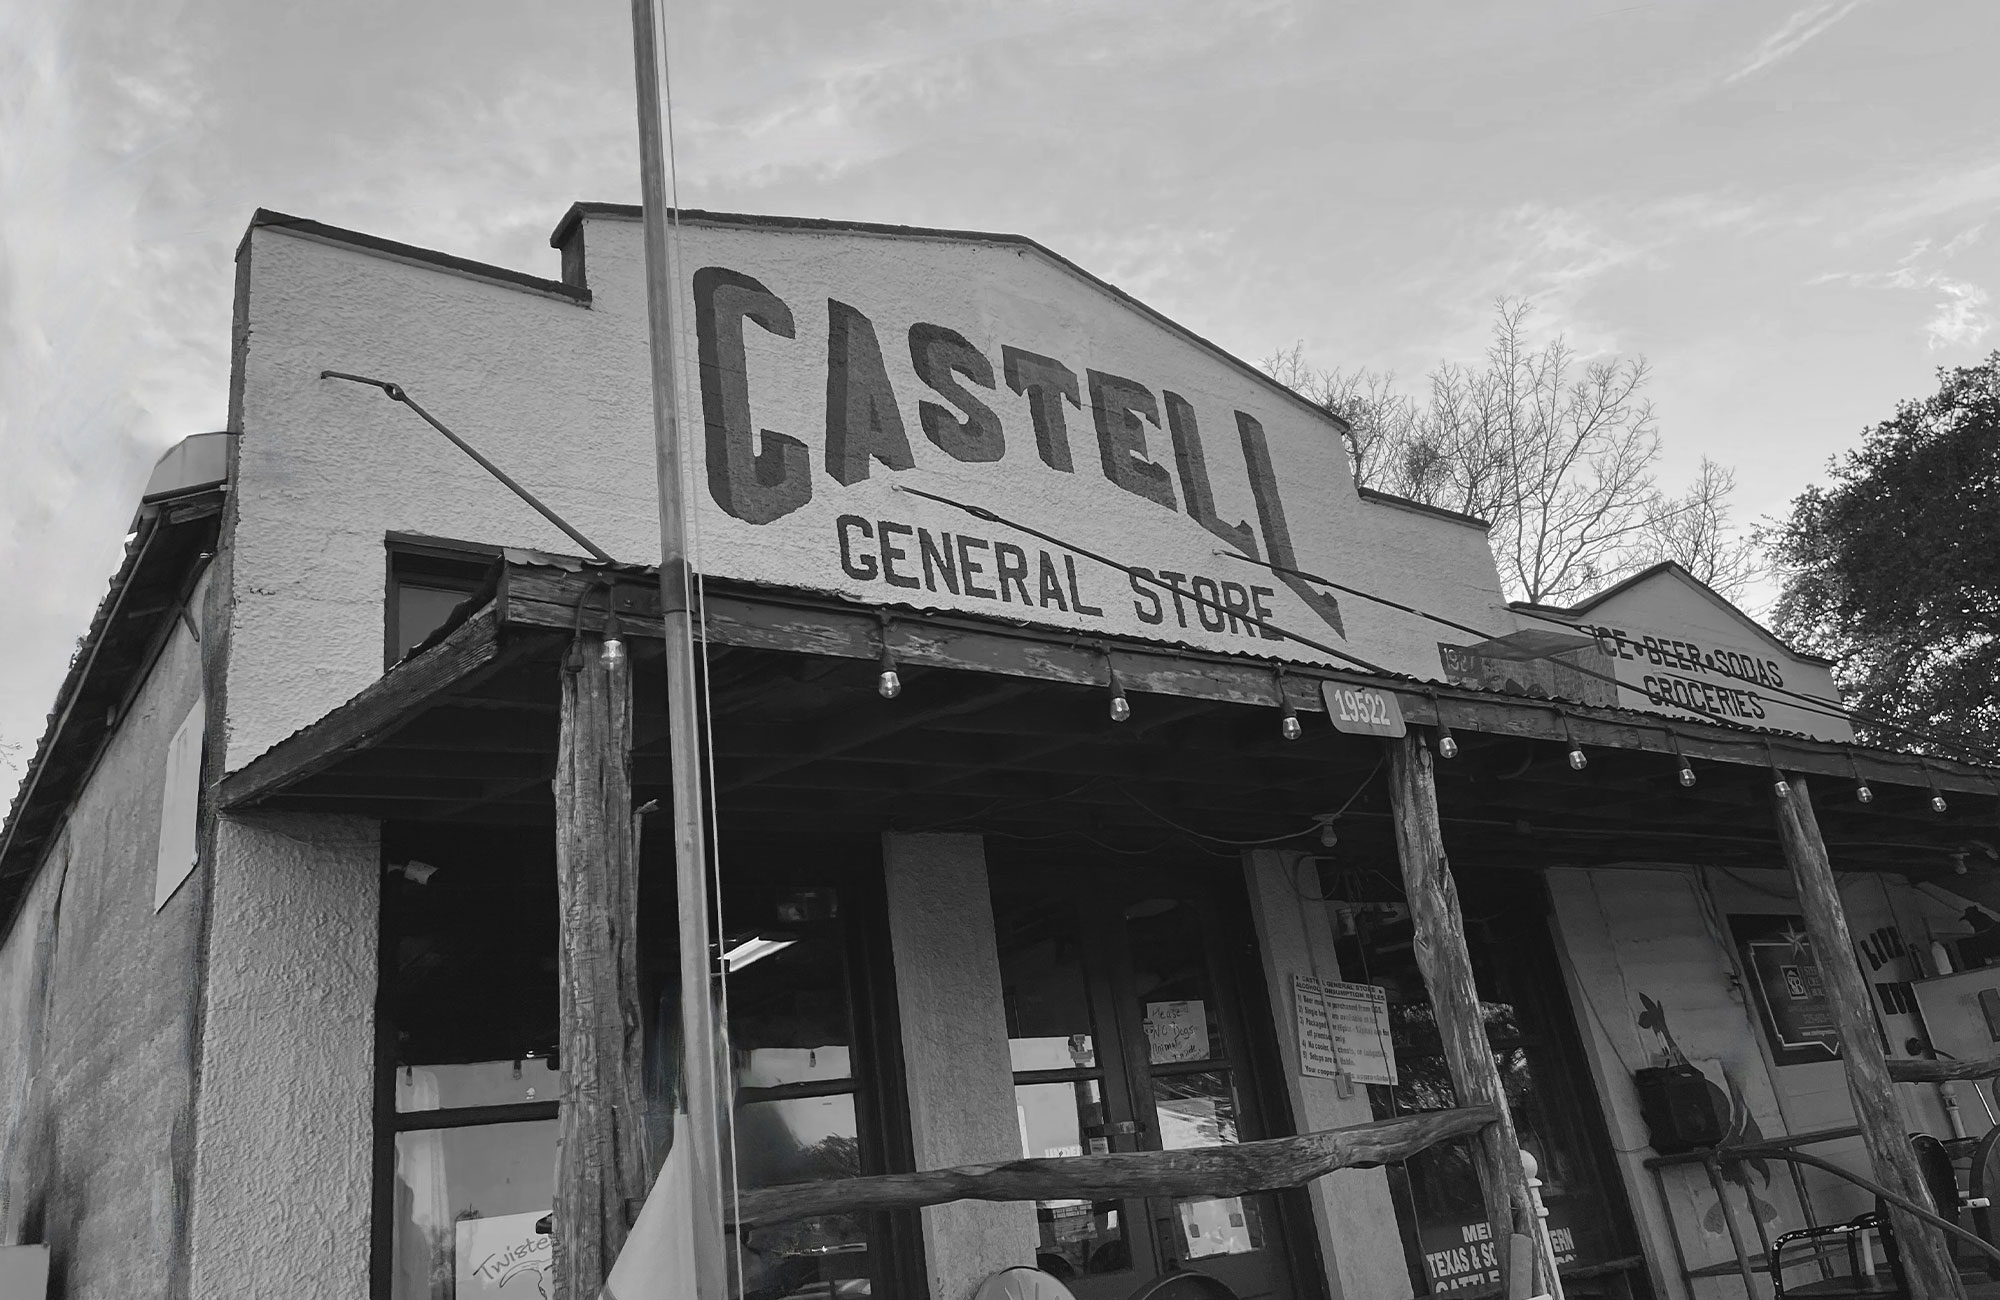 Castell General Store